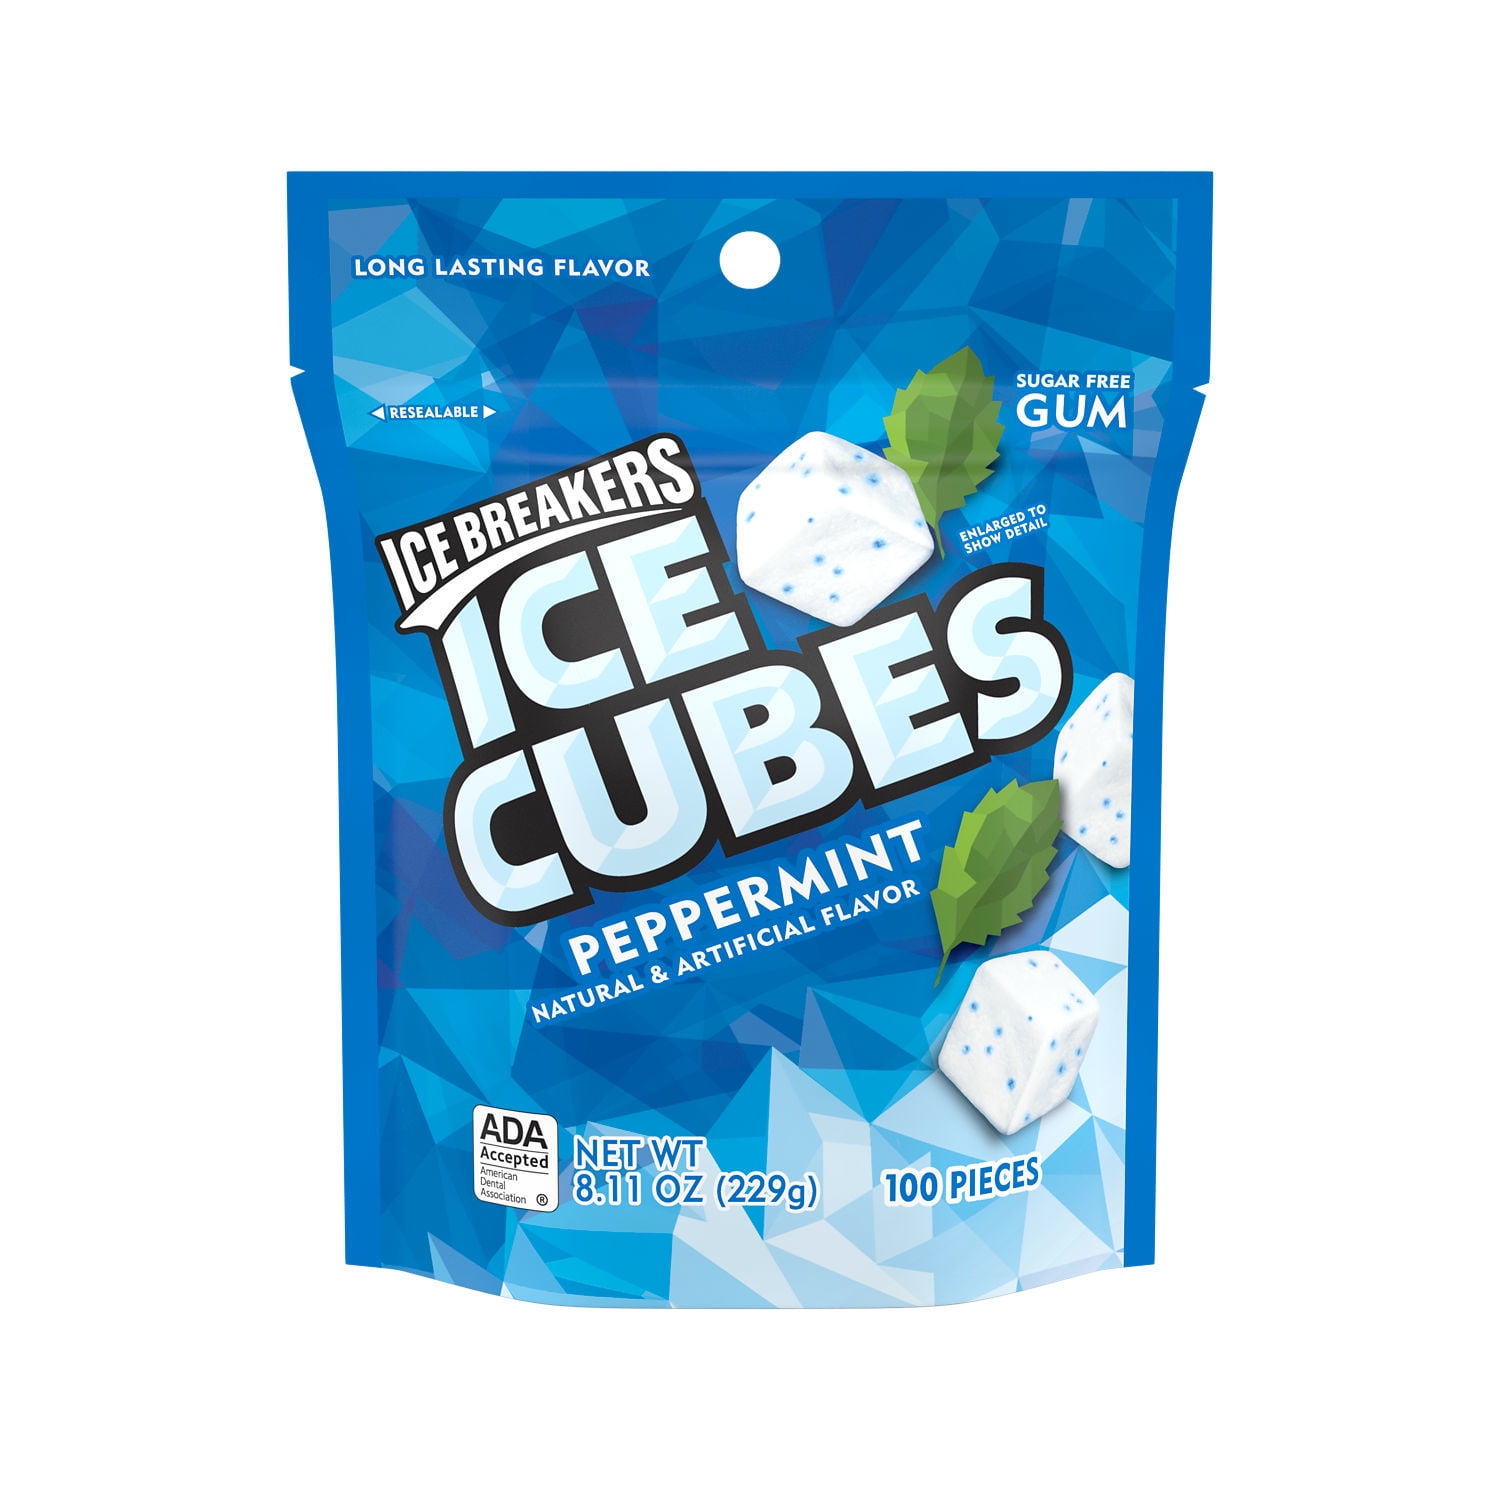 ICE BREAKERS ICE CUBES Peppermint With Cooling Crystals, Made with Xylitol Sugar Free Chewing Gum Pouch, 8.11 oz (100 Pieces)